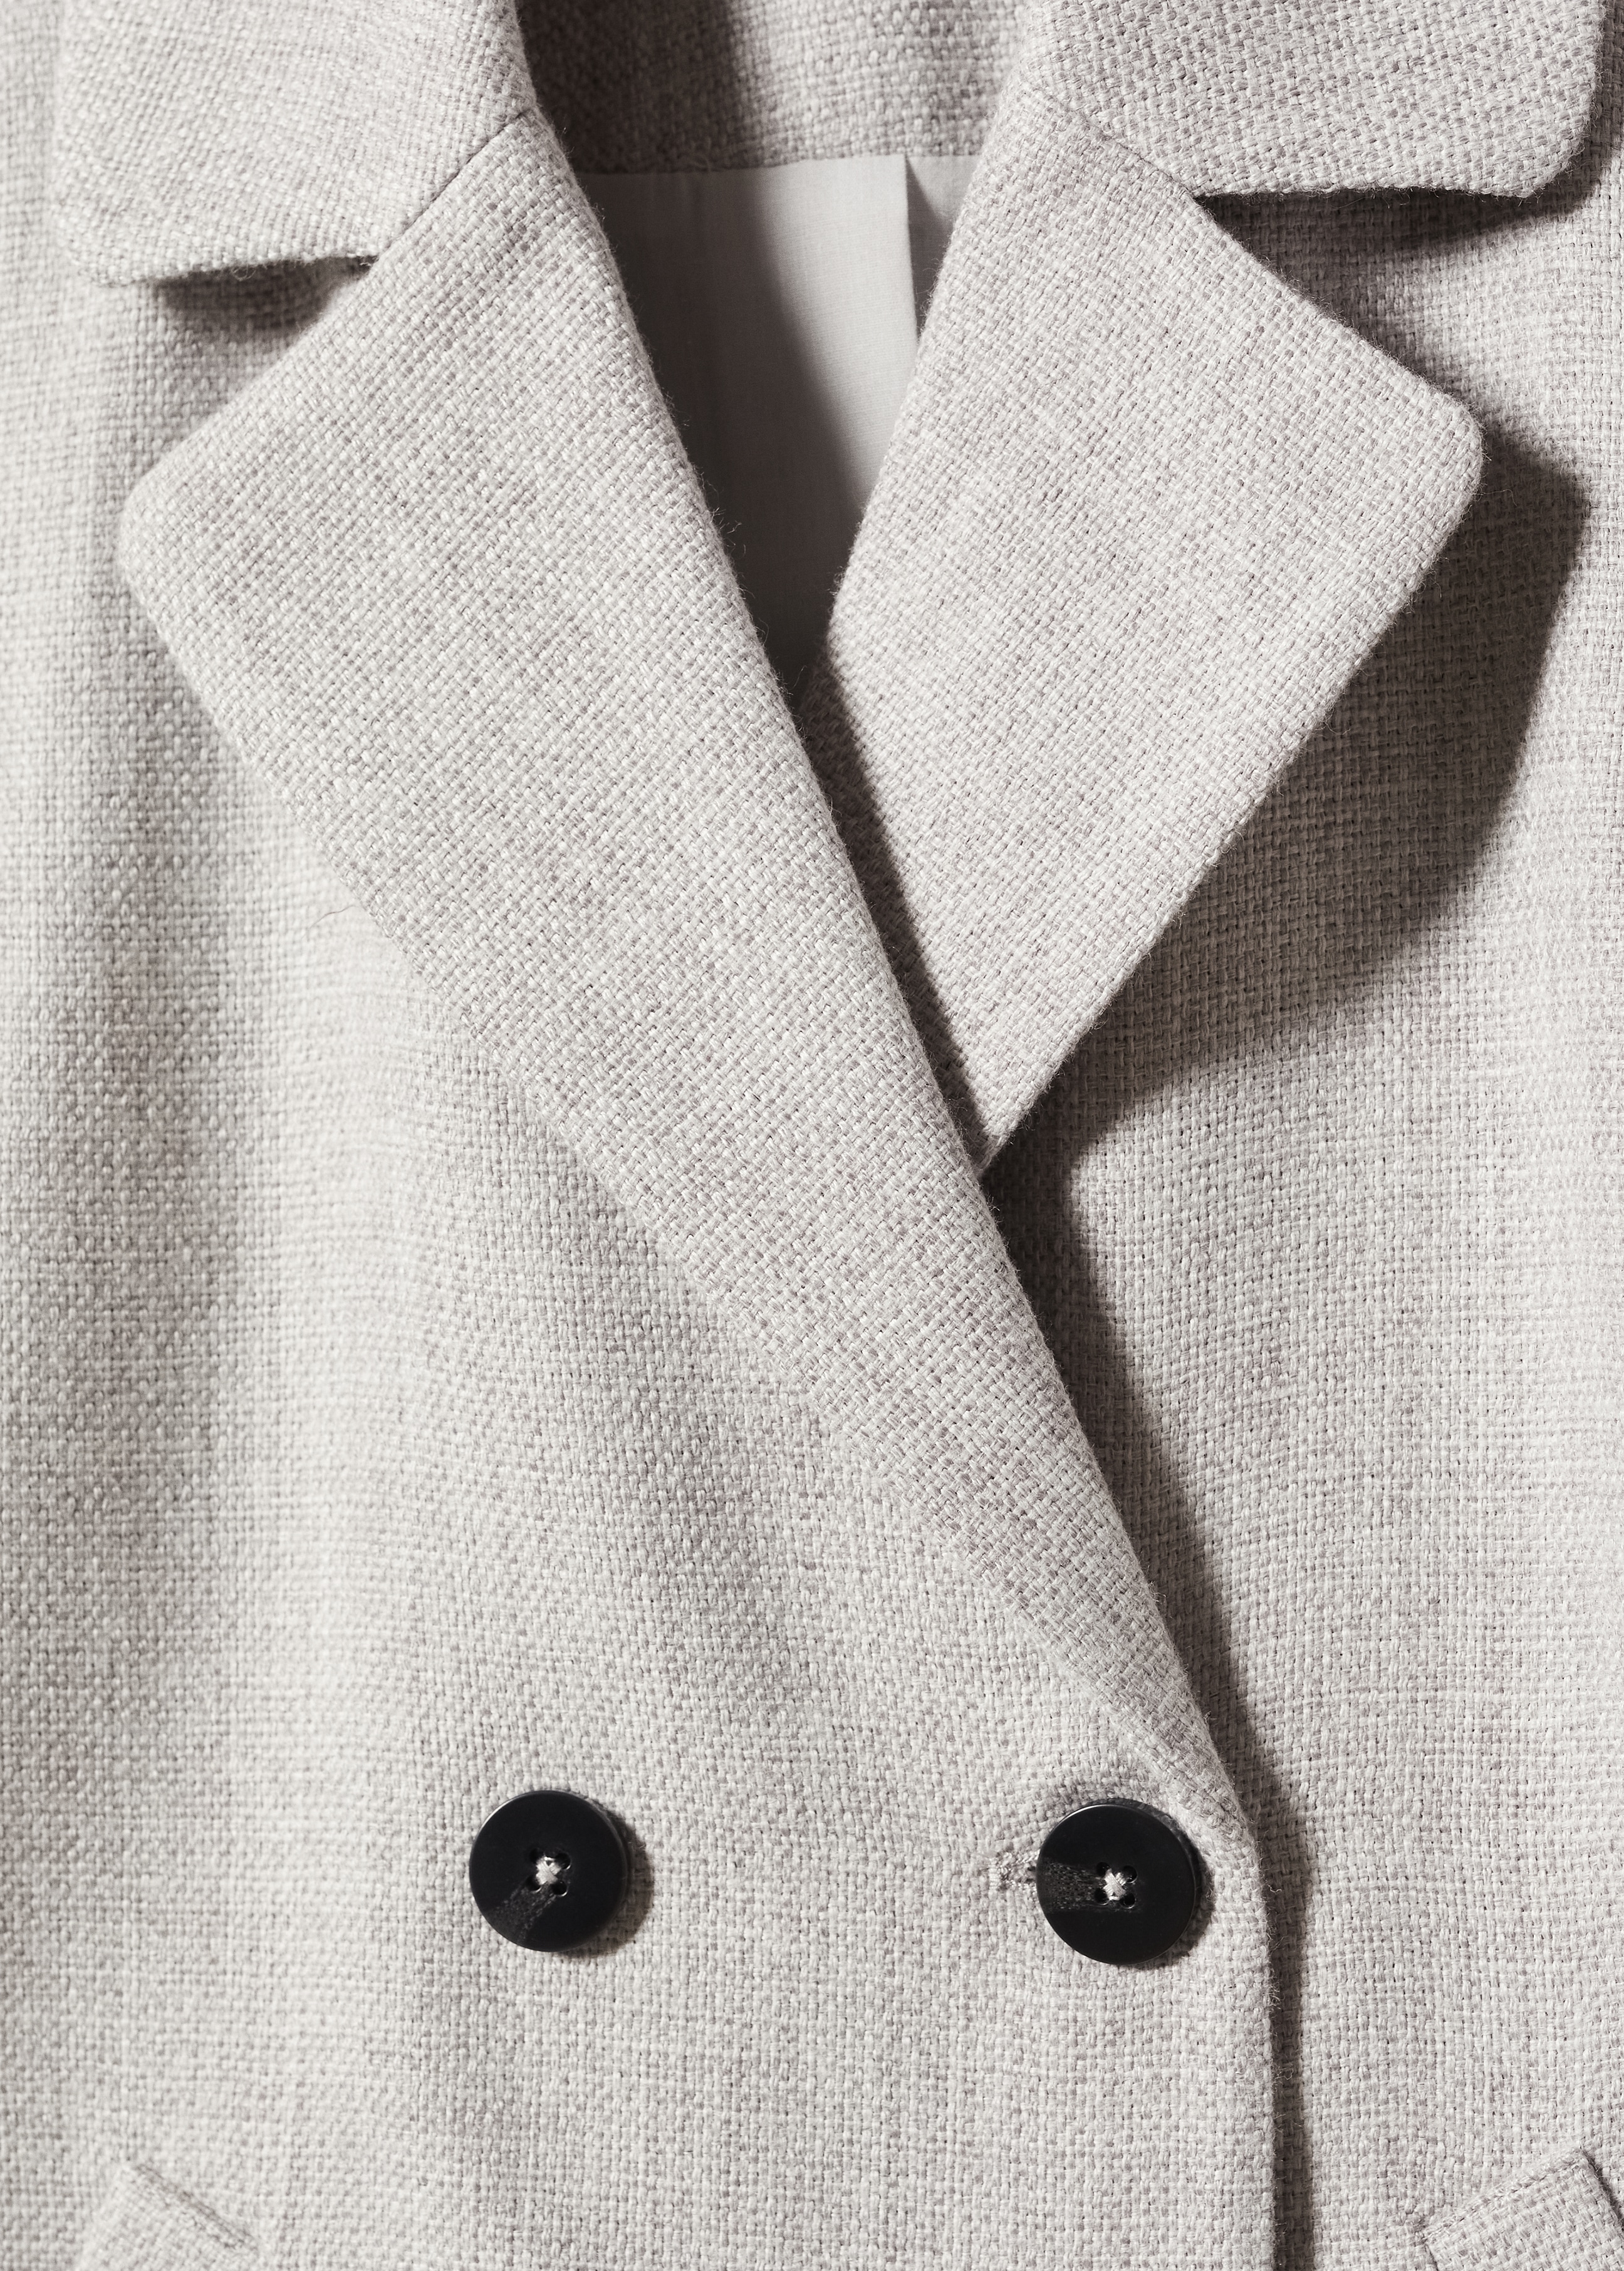 Double-breasted coat - Details of the article 8